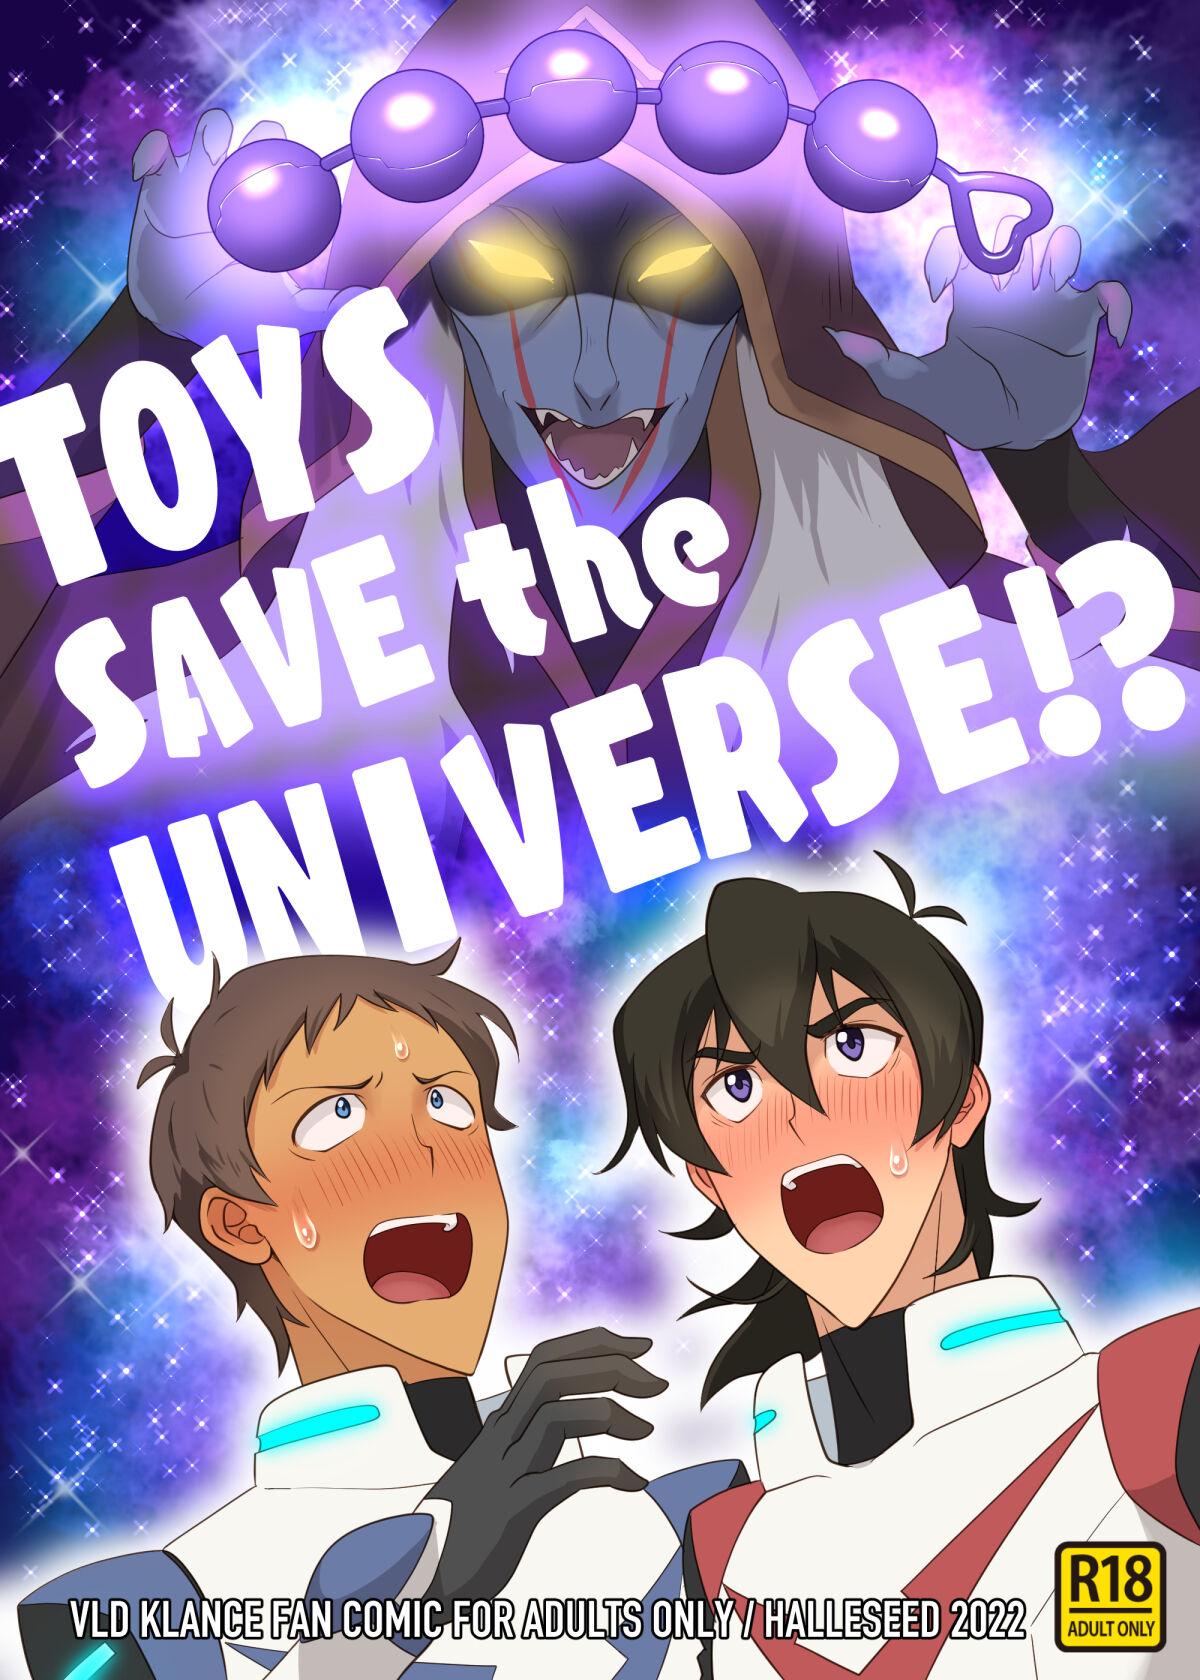 Toys save the universe!? 0